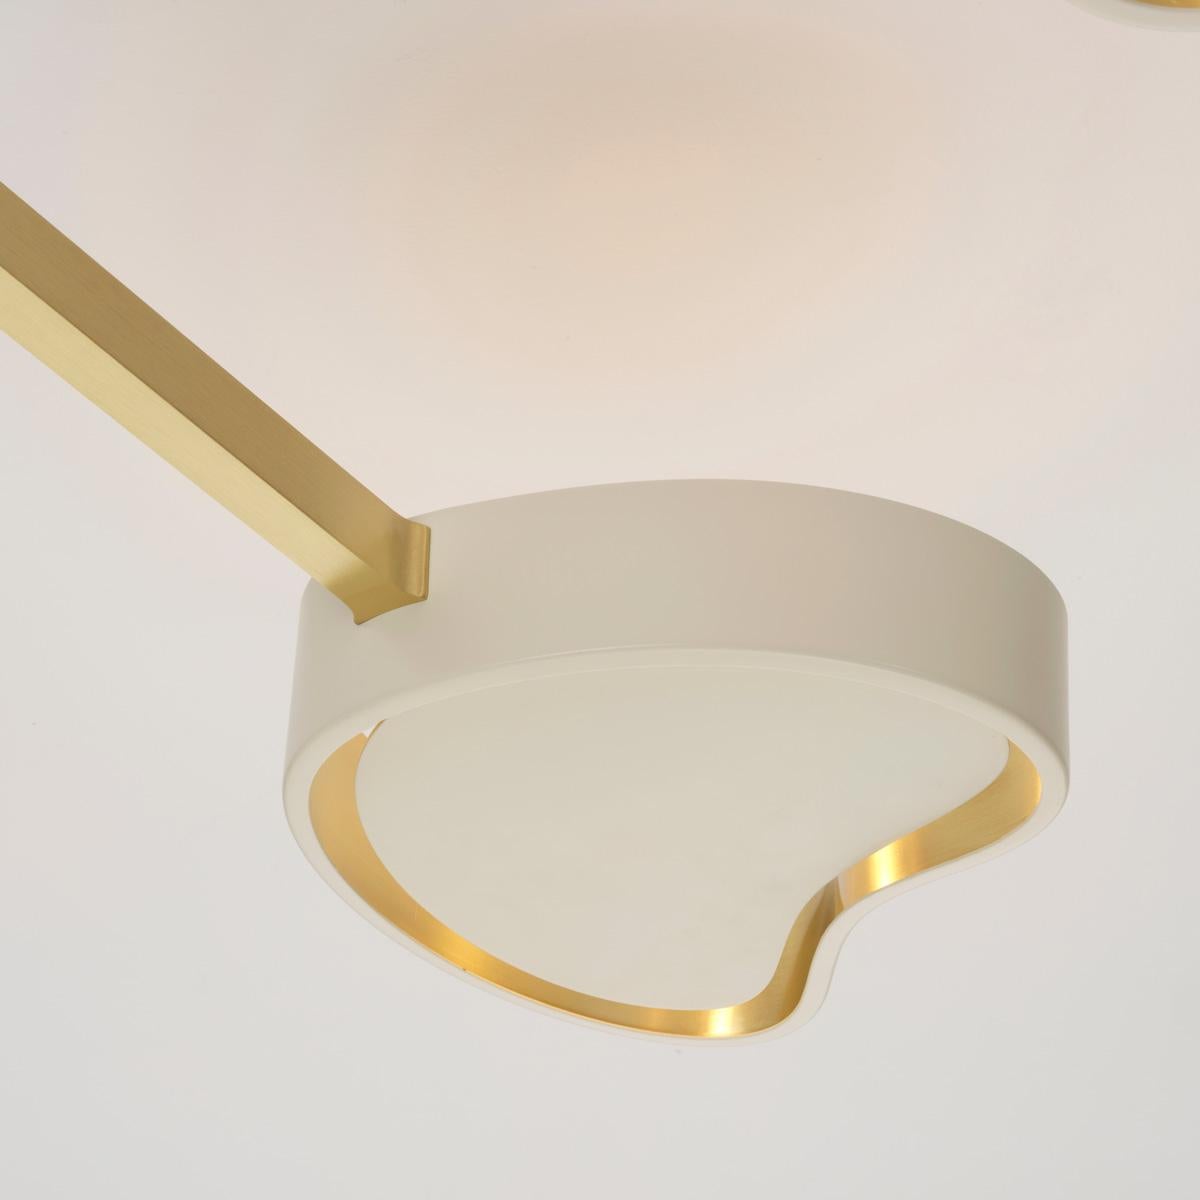 Cuore N.3 Ceiling Light by Gaspare Asaro. Peltro and Bronze Finish For Sale 4